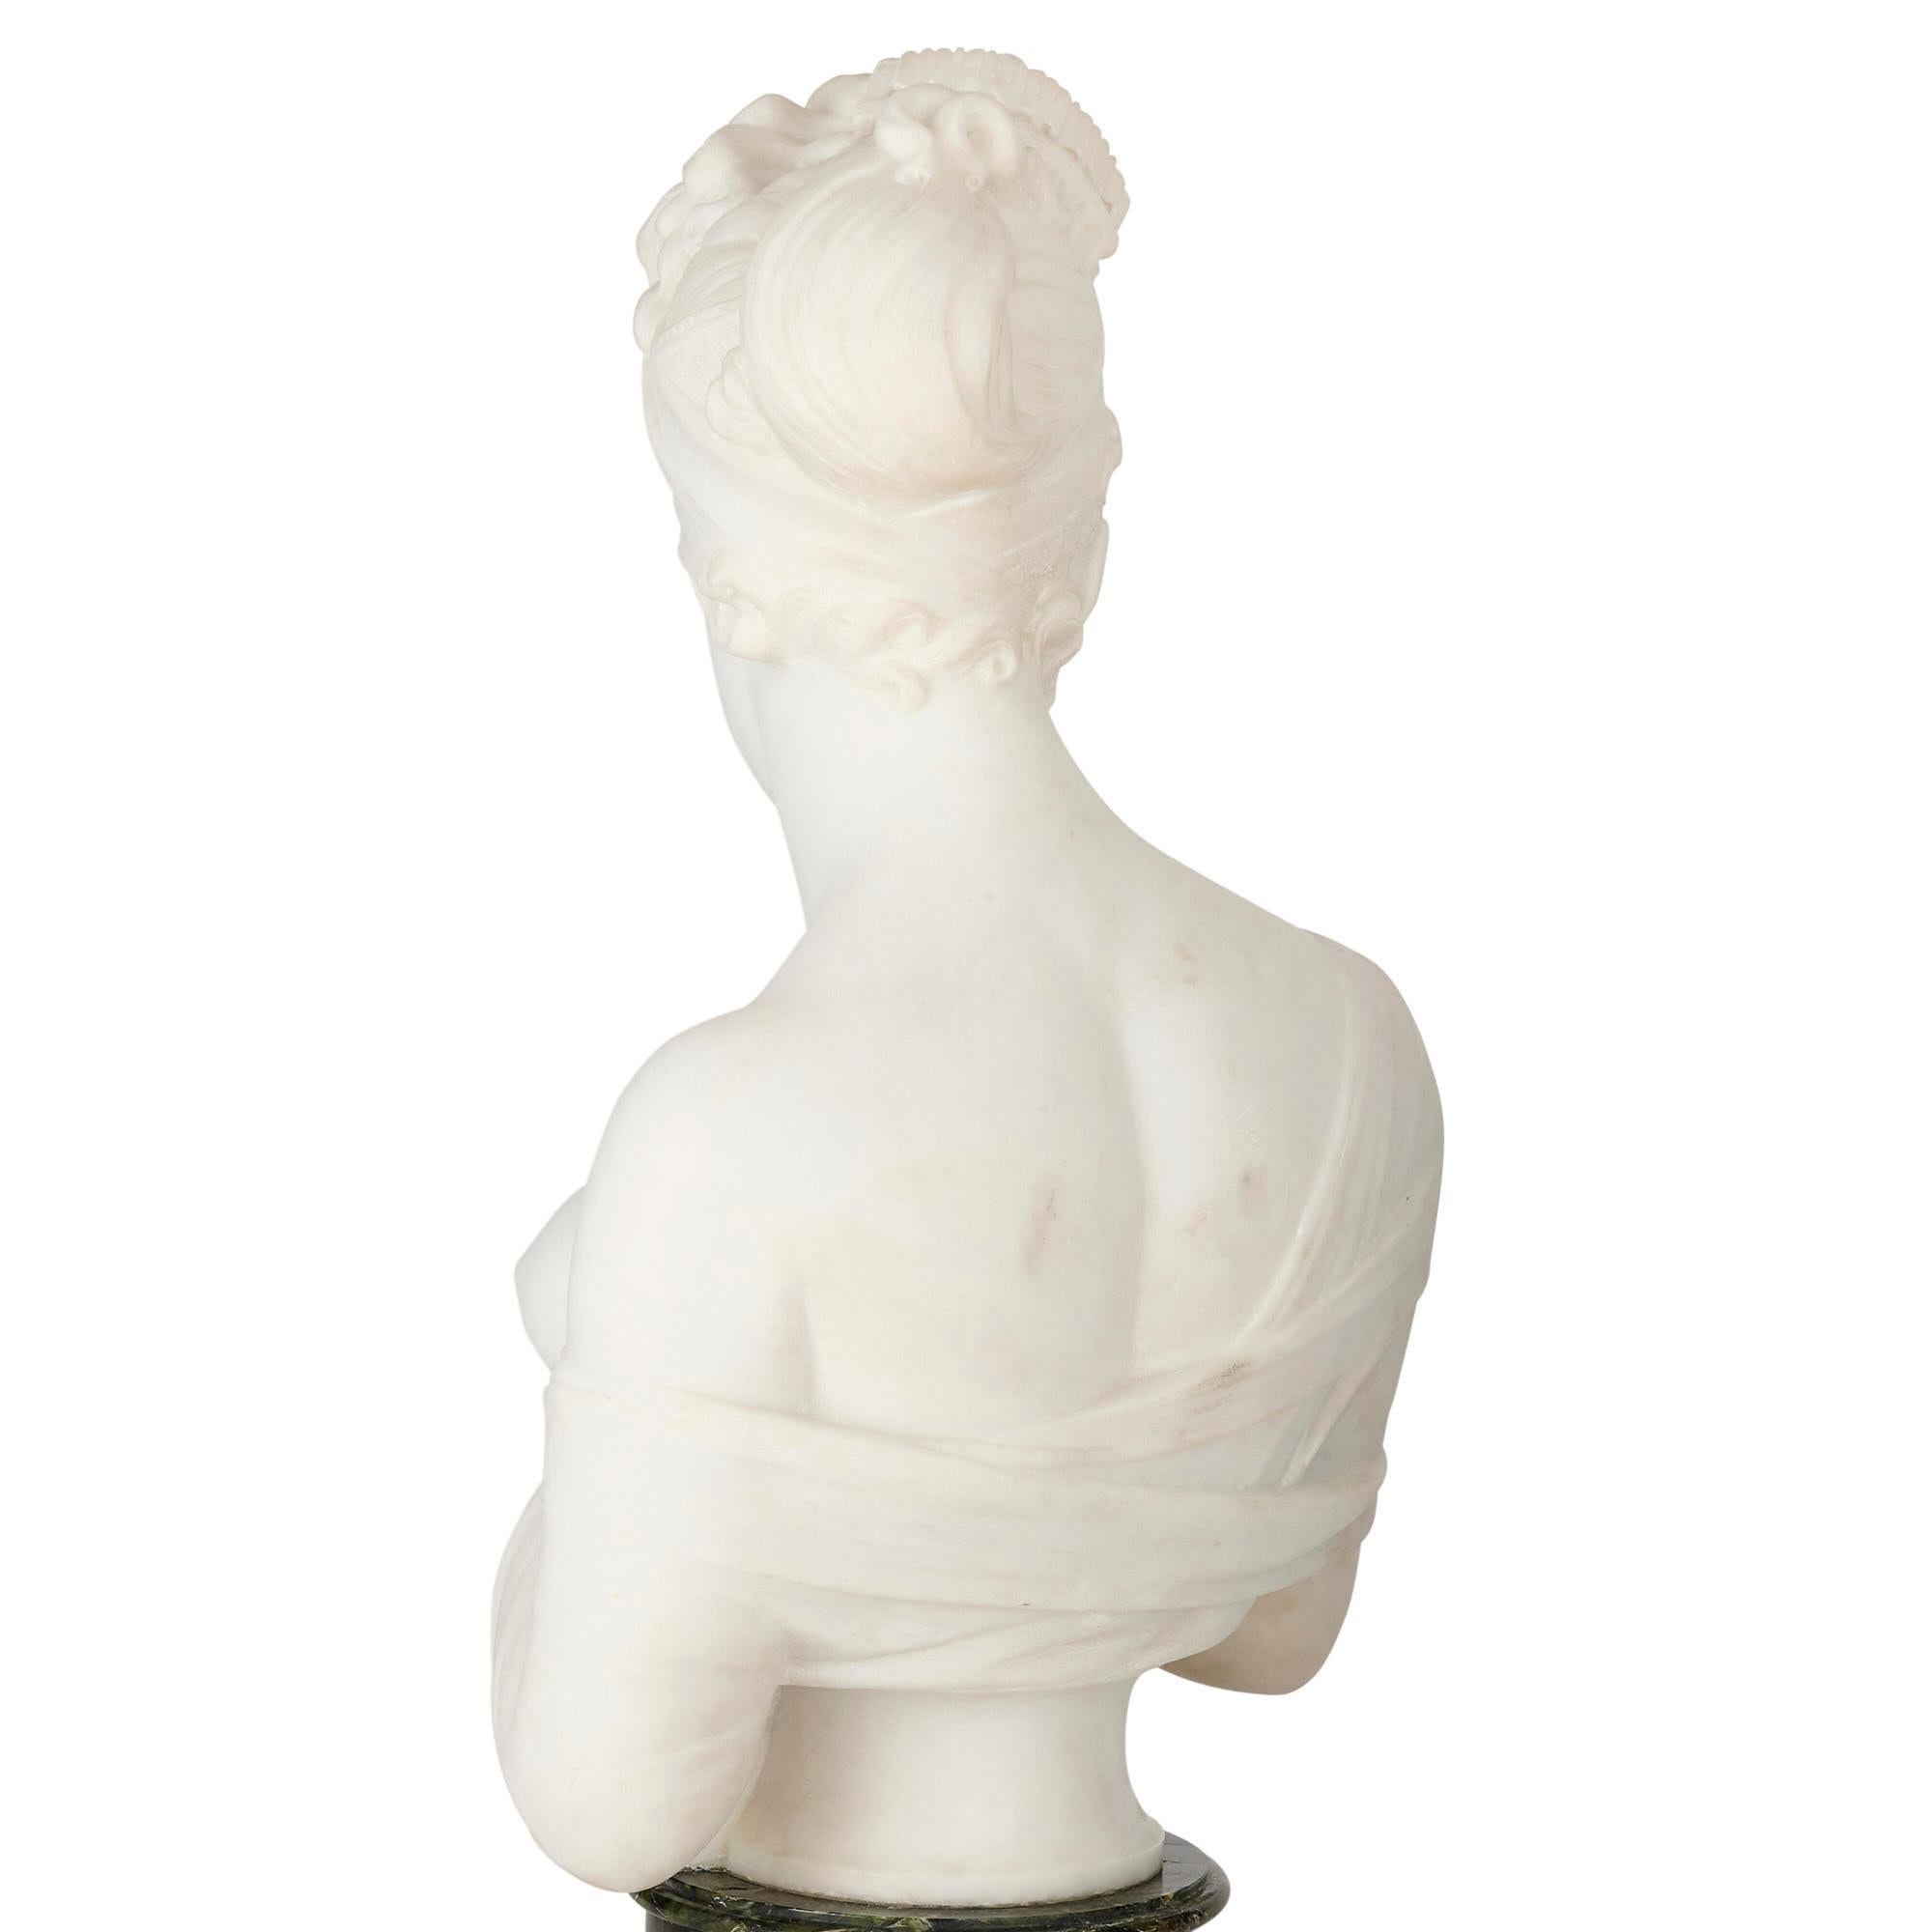 French Neoclassical Marble Sculpture Bust After Joseph Chinard For Sale